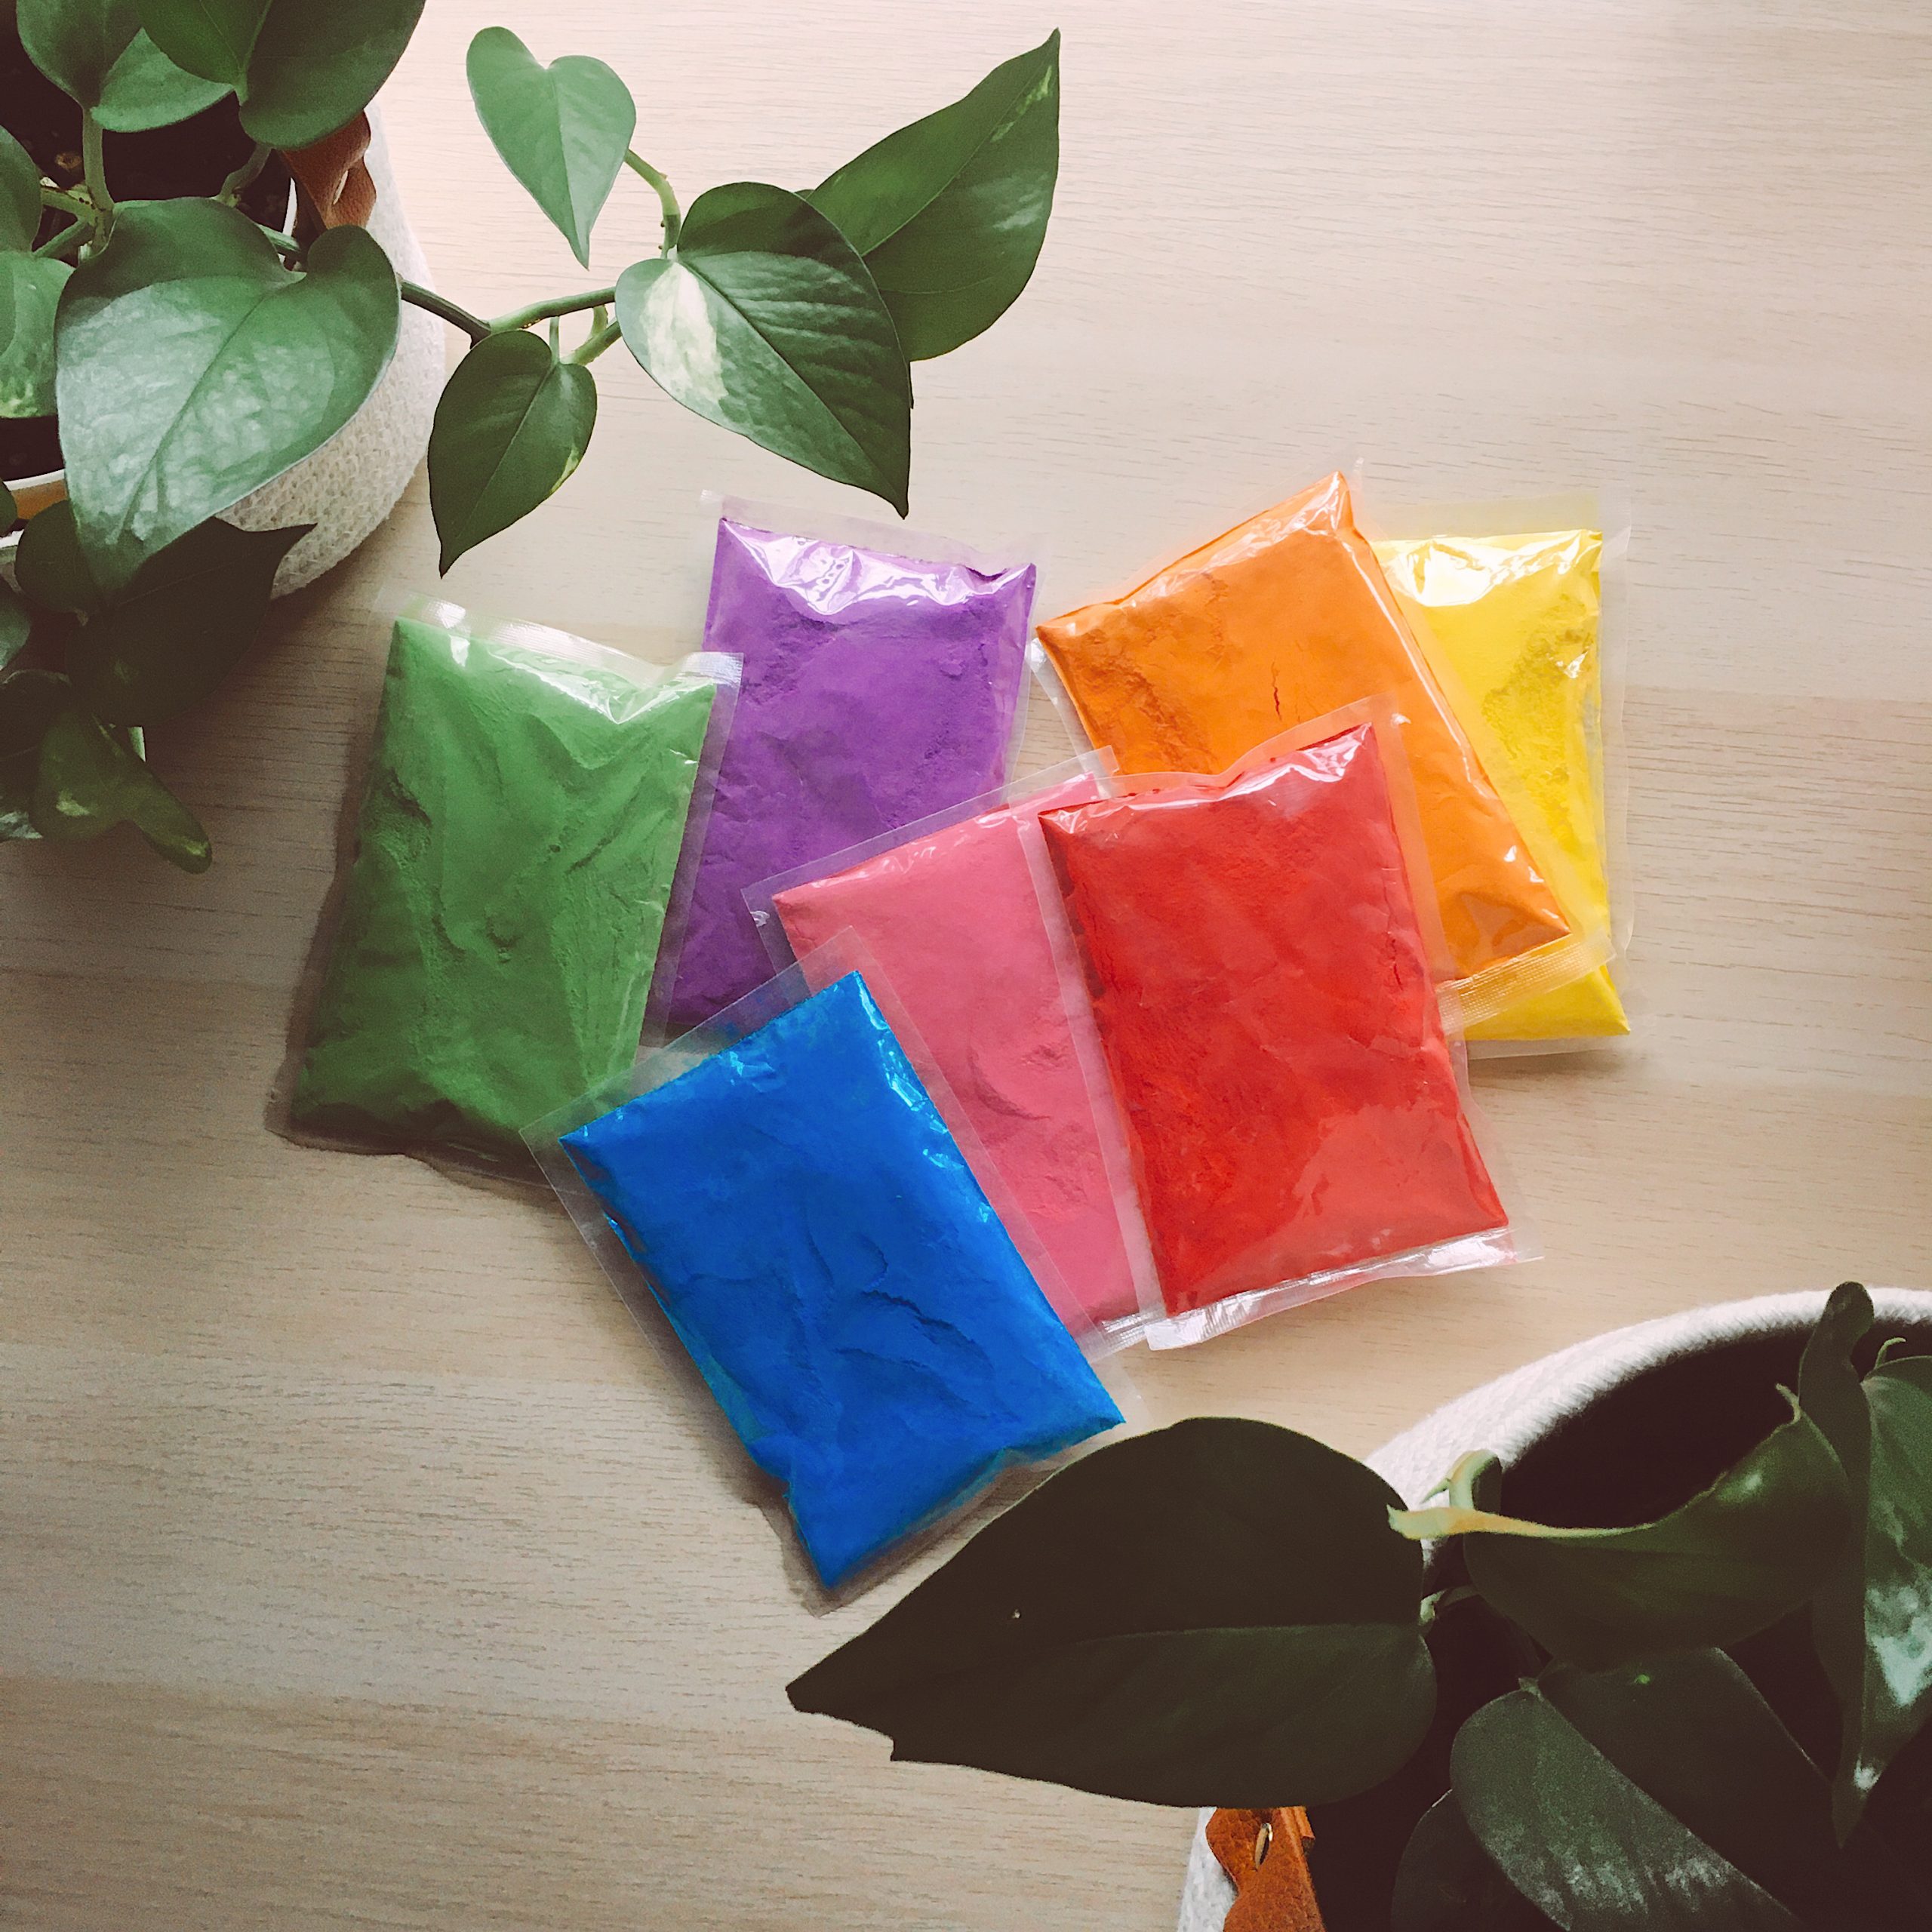 https://www.colorpowdersupply.com/wp-content/uploads/2018/07/color-powder-packets-3-scaled.jpg